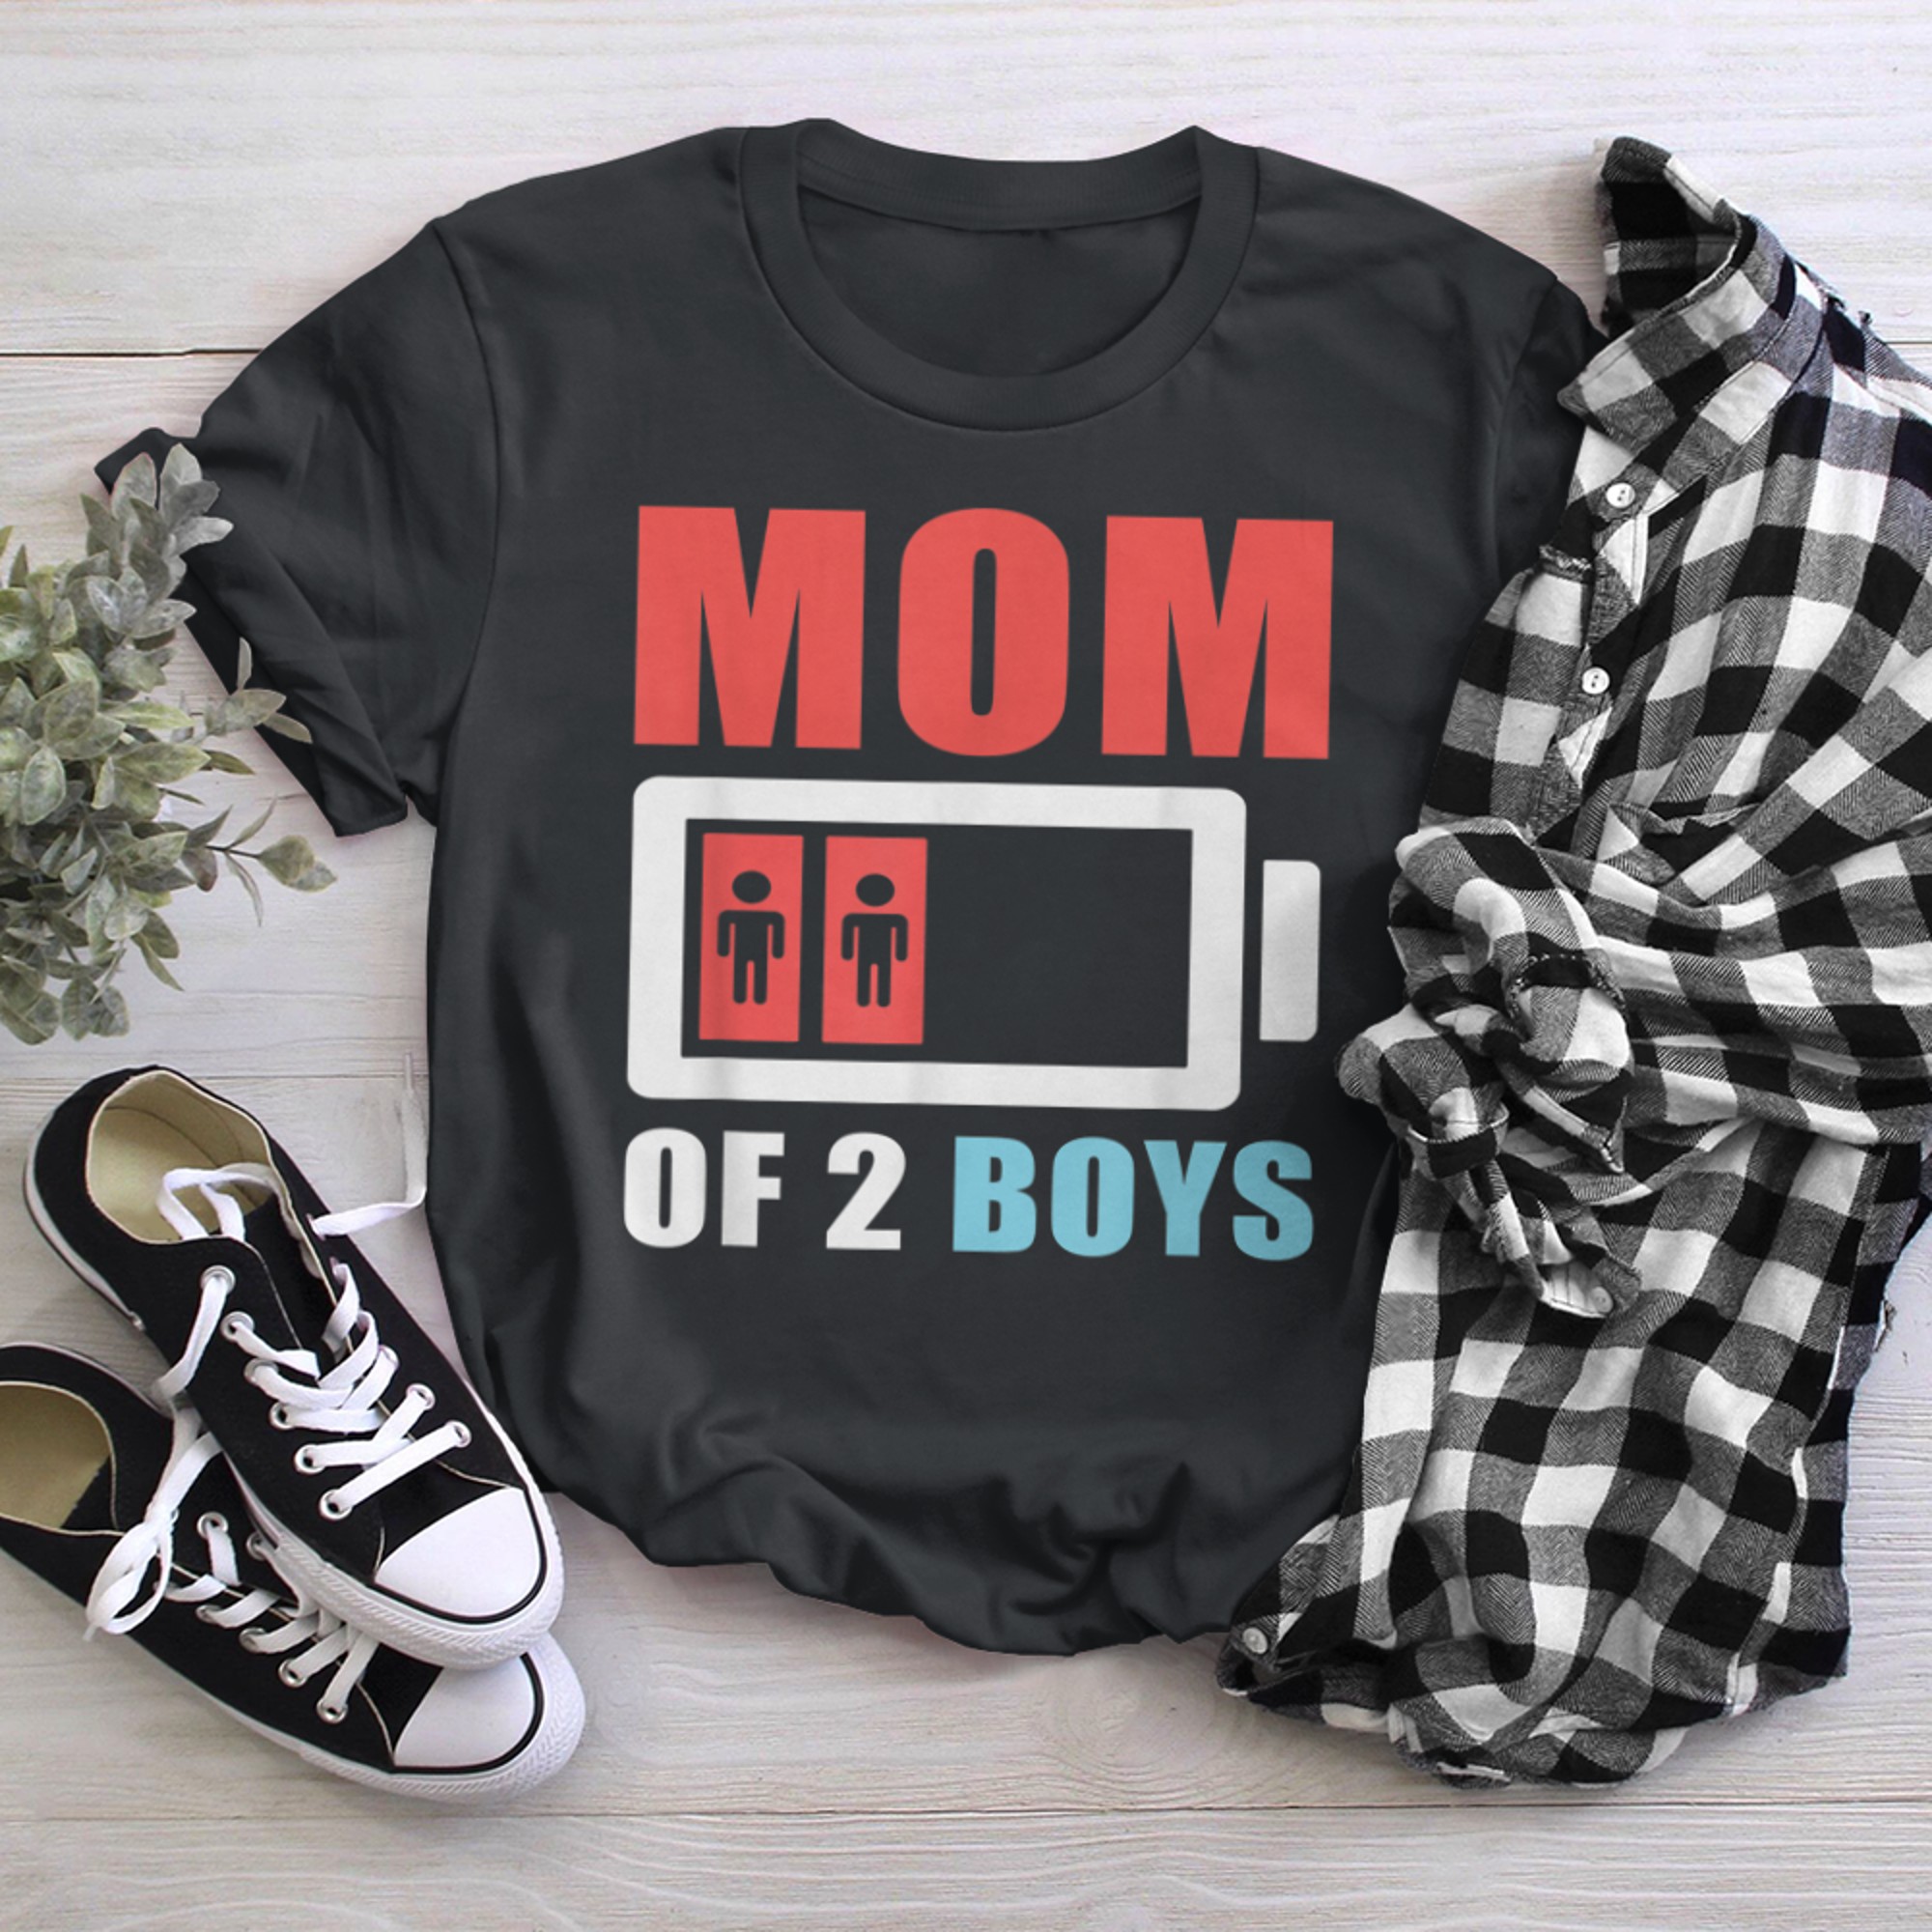 MOM OF from Son Mothers Day Birthday (1) t-shirt black